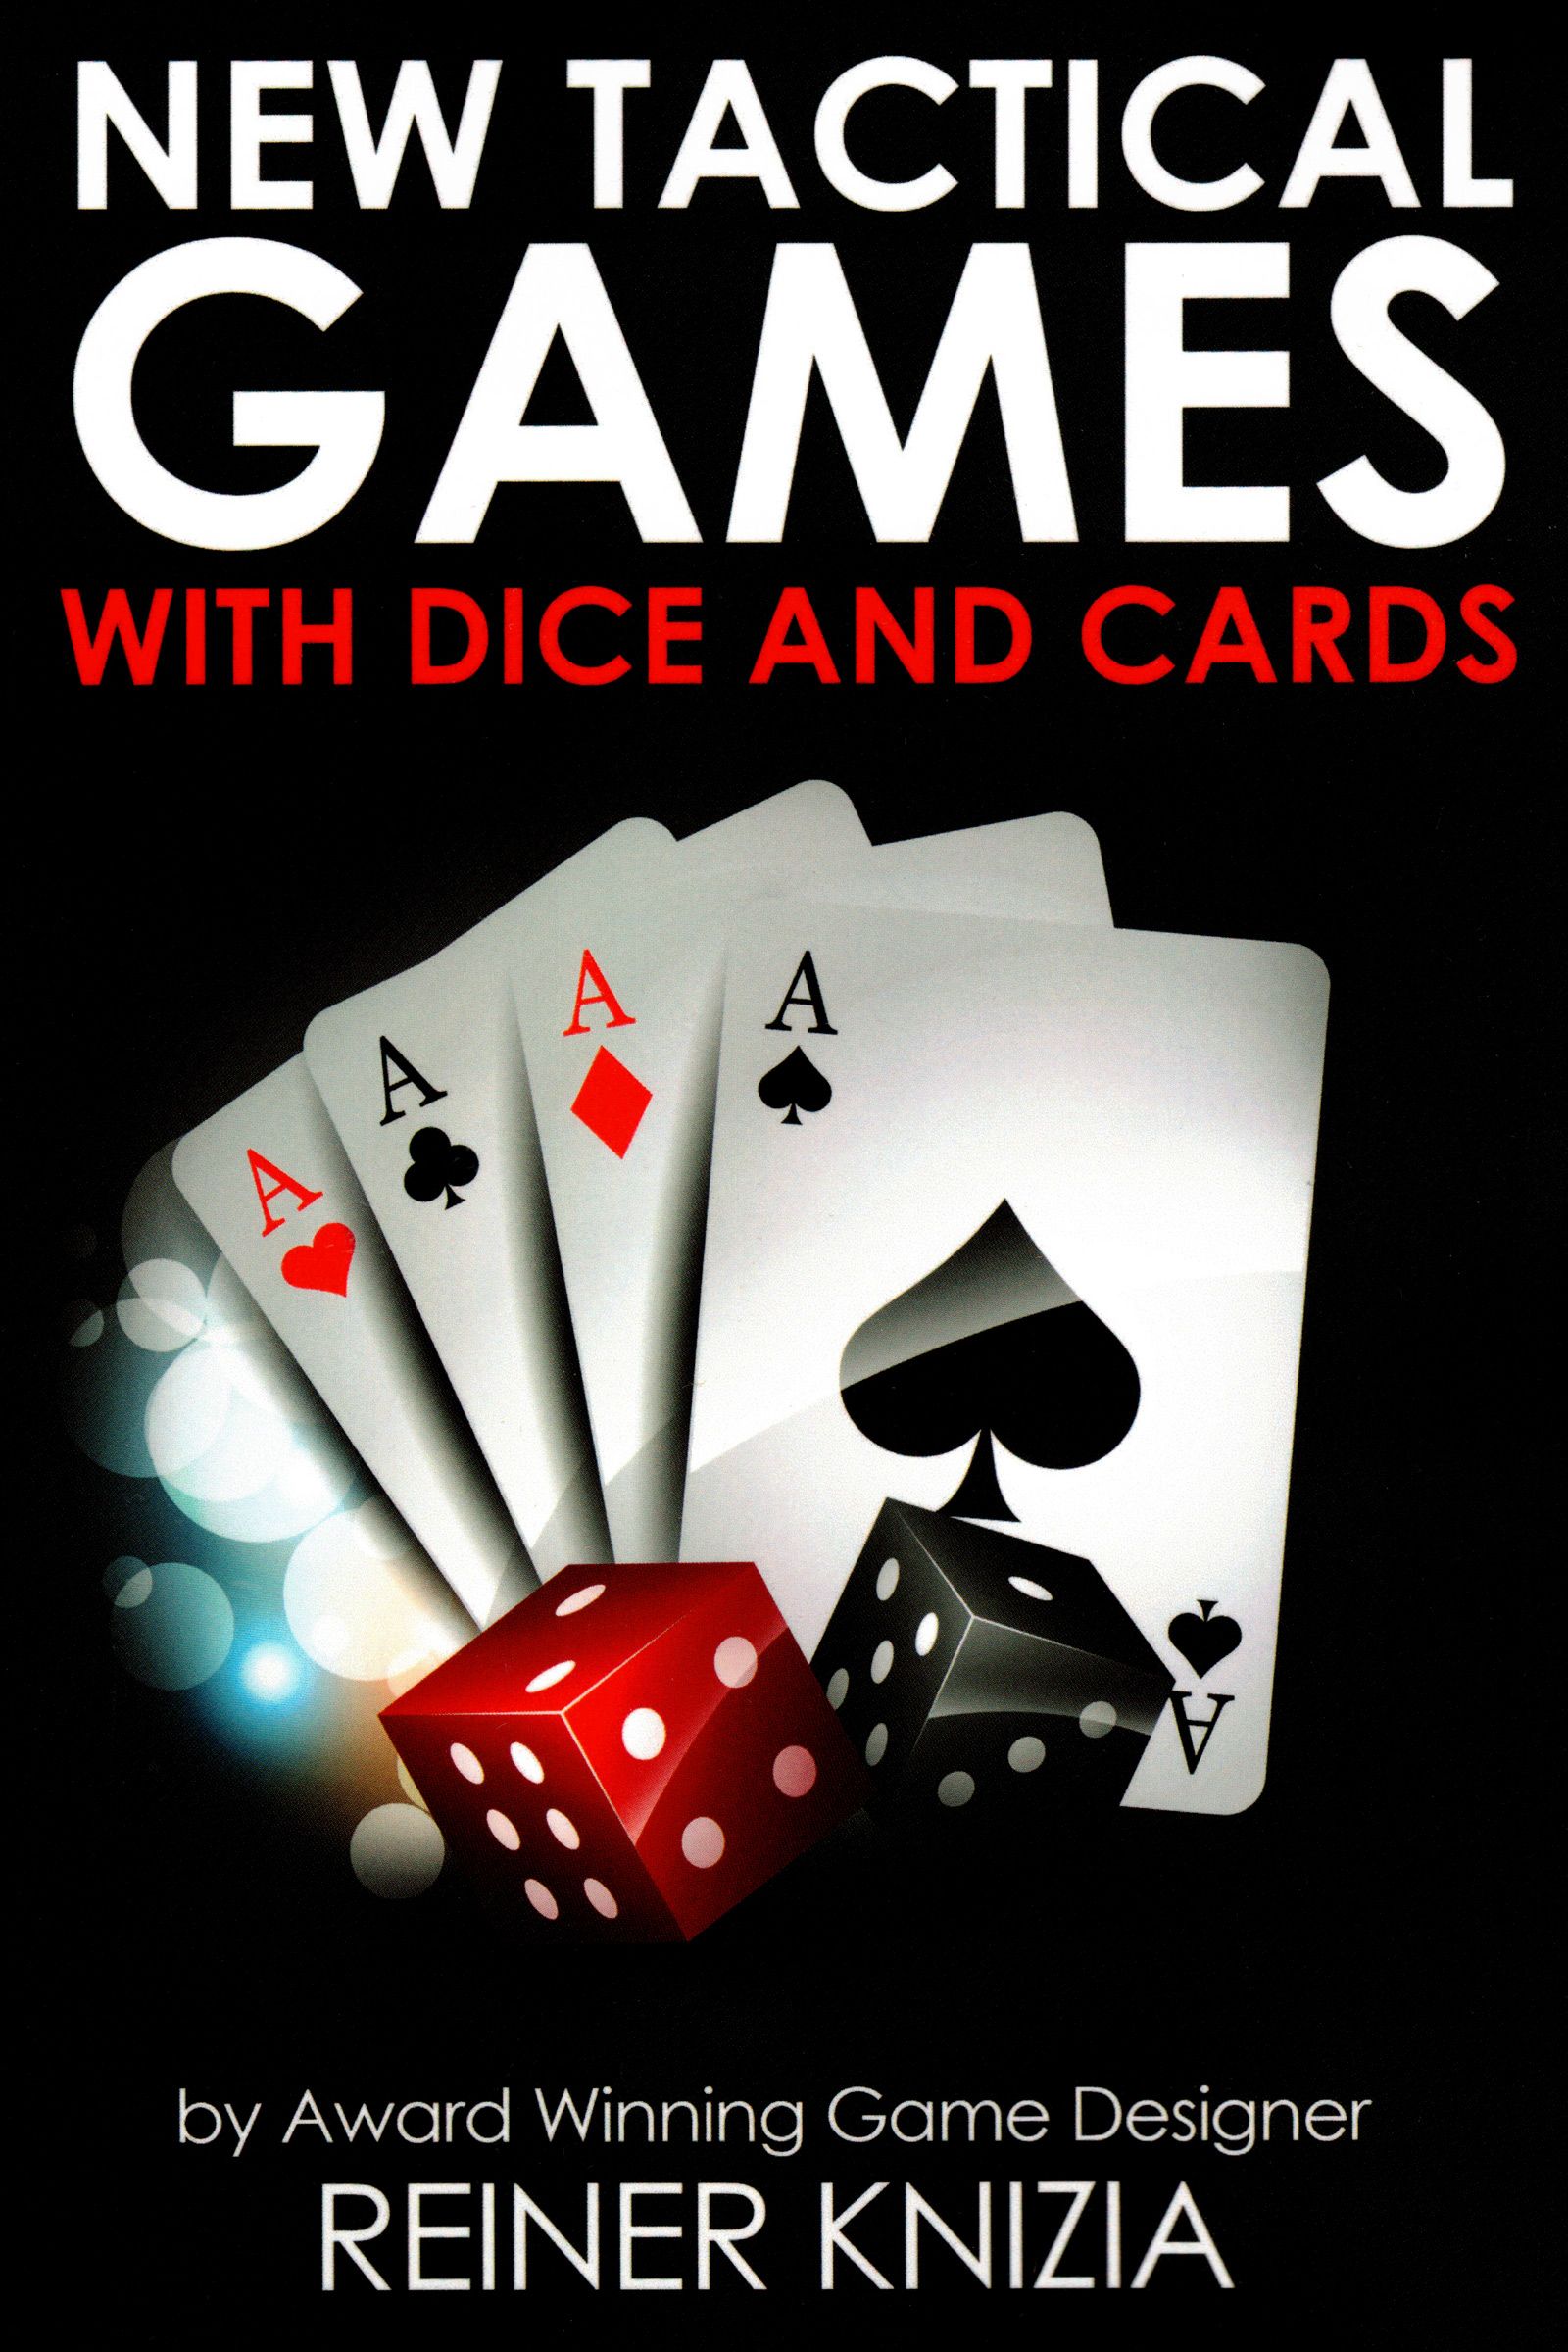 New Tactical Games with Dice and Cards